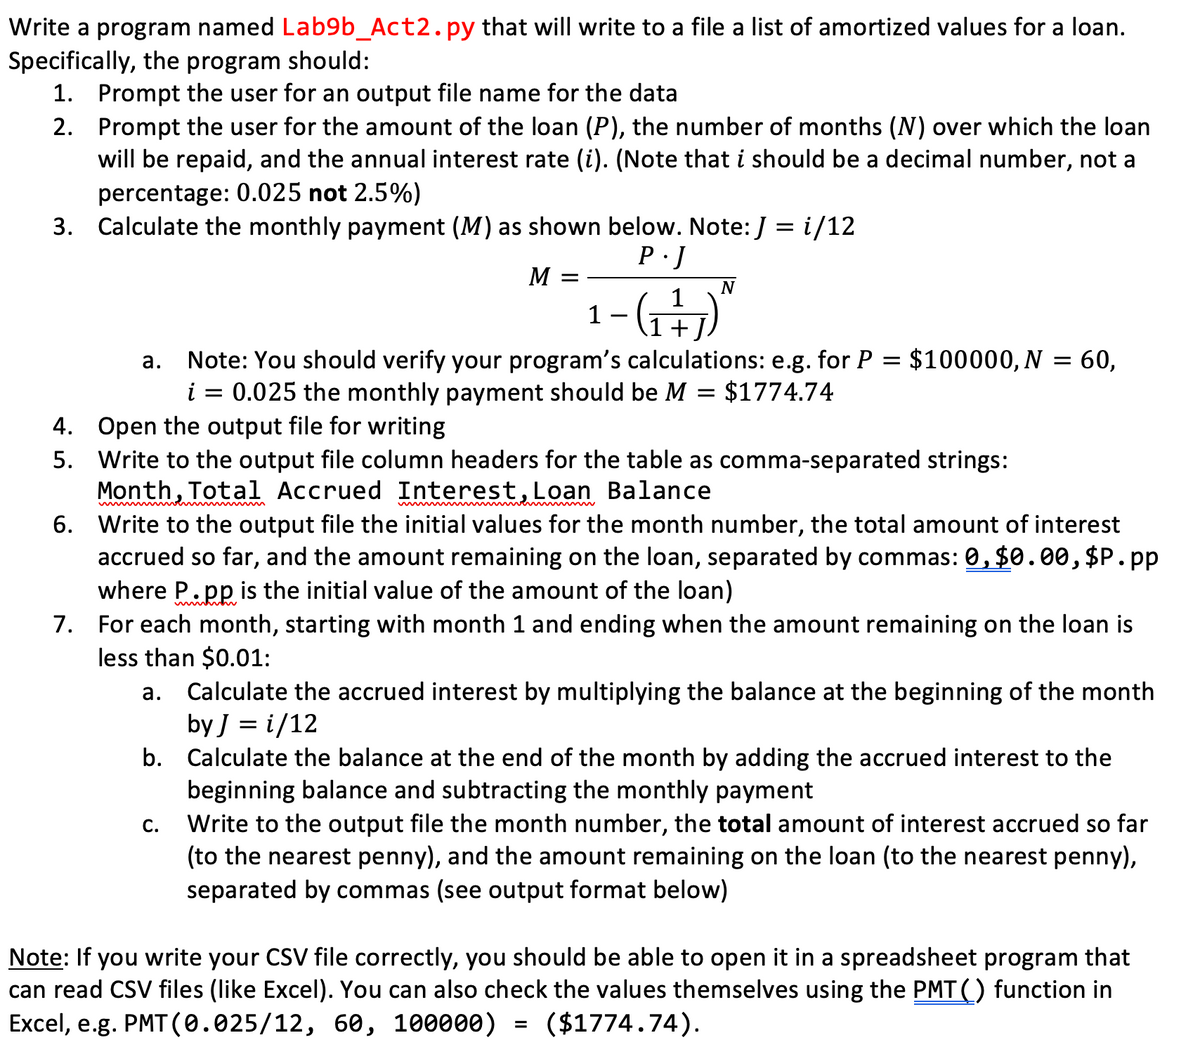 Write a program named Lab9b_Act2.py that will write to a file a list of amortized values for a loan.
Specifically, the program should:
1. Prompt the user for an output file name for the data
2. Prompt the user for the amount of the loan (P), the number of months (N) over which the loan
will be repaid, and the annual interest rate (i). (Note that i should be a decimal number, not a
percentage: 0.025 not 2.5%)
3. Calculate the monthly payment (M) as shown below. Note: J = i/12
M =
N
1-G)"
-(G
+J.
Note: You should verify your program's calculations: e.g. for P = $100000, N = 60,
0.025 the monthly payment should be M = $1774.74
а.
i
4. Open the output file for writing
5. Write to the output file column headers for the table as comma-separated strings:
Month, Total Accrued Interest,Loan Balance
6. Write to the output file the initial values for the month number, the total amount of interest
accrued so far, and the amount remaining on the loan, separated by commas: 0, $0.00, $P.pp
where P.pp is the initial value of the amount of the loan)
7. For each month, starting with month 1 and ending when the amount remaining on the loan is
less than $0.01:
Calculate the accrued interest by multiplying the balance at the beginning of the month
by J = i/12
b. Calculate the balance at the end of the month by adding the accrued interest to the
beginning balance and subtracting the monthly payment
Write to the output file the month number, the total amount of interest accrued so far
(to the nearest penny), and the amount remaining on the loan (to the nearest penny),
separated by commas (see output format below)
а.
С.
Note: If you write your CSV file correctly, you should be able to open it in a spreadsheet program that
can read CSV files (like Excel). You can also check the values themselves using the PMT() function in
Excel, e.g. PMT (0.025/12, 60, 100000)
($1774.74).
